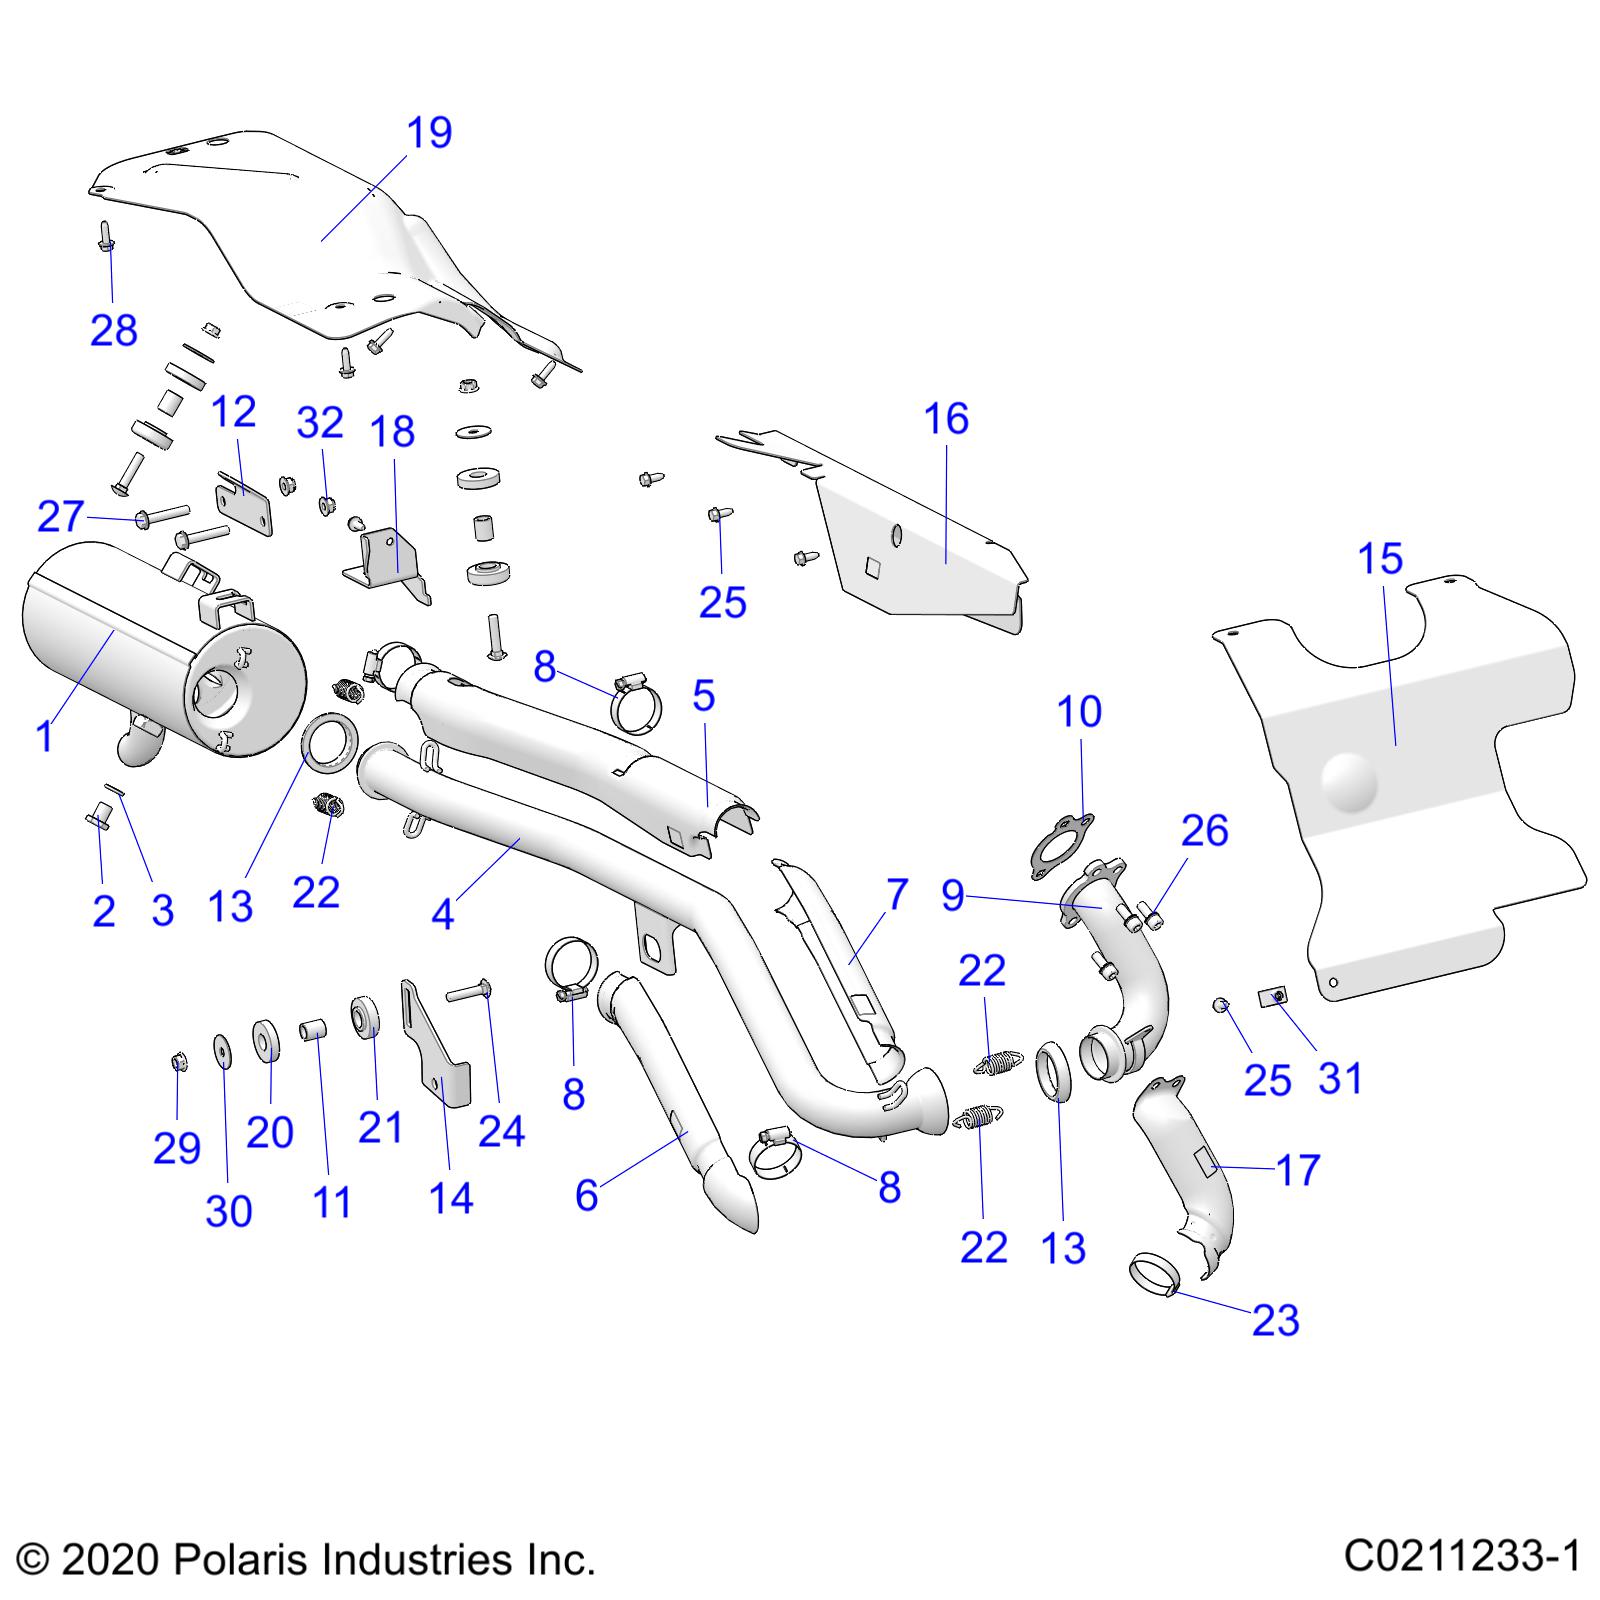 Part Number : 5262846 SHIELD-EXHAUST MANIFOLD 450